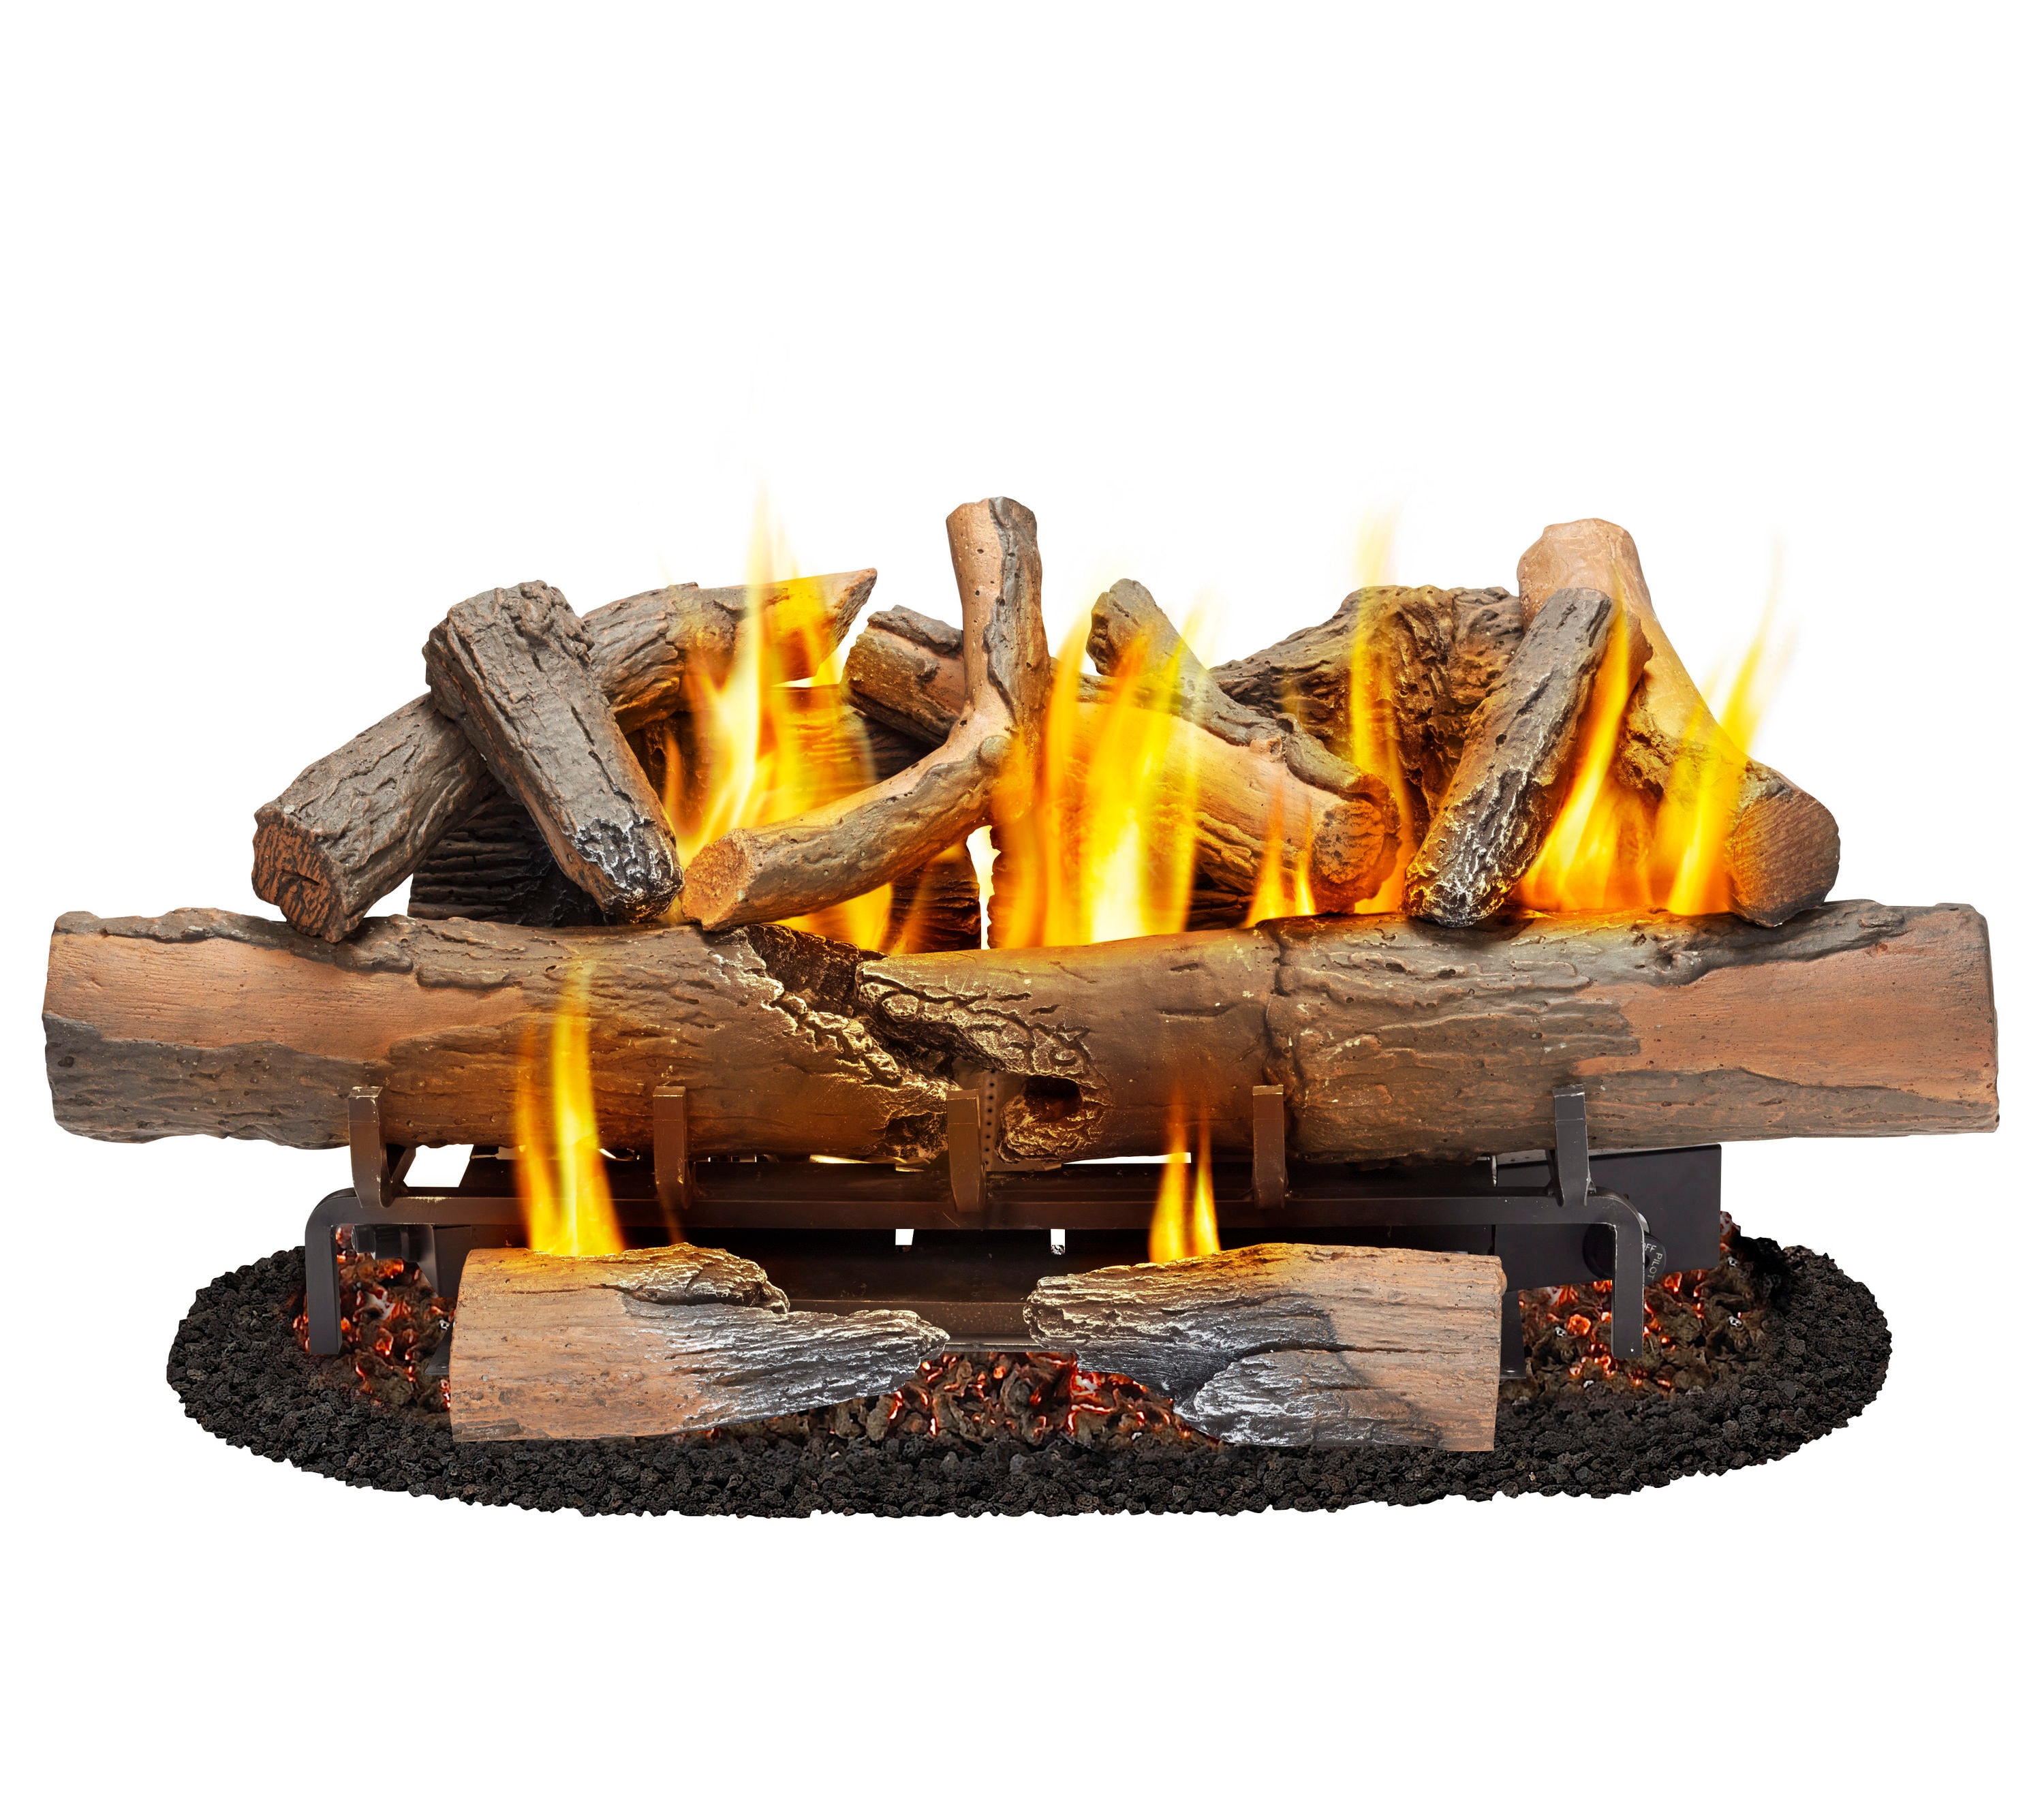 GrillPartsReplacement - Online BBQ Parts Retailer GAS Fireplace Logs, Ventless Ceramic Logs for GAS Fire Pits, 6 Pcs, Electric, Propane GAS Fireplace Decorative Inserts